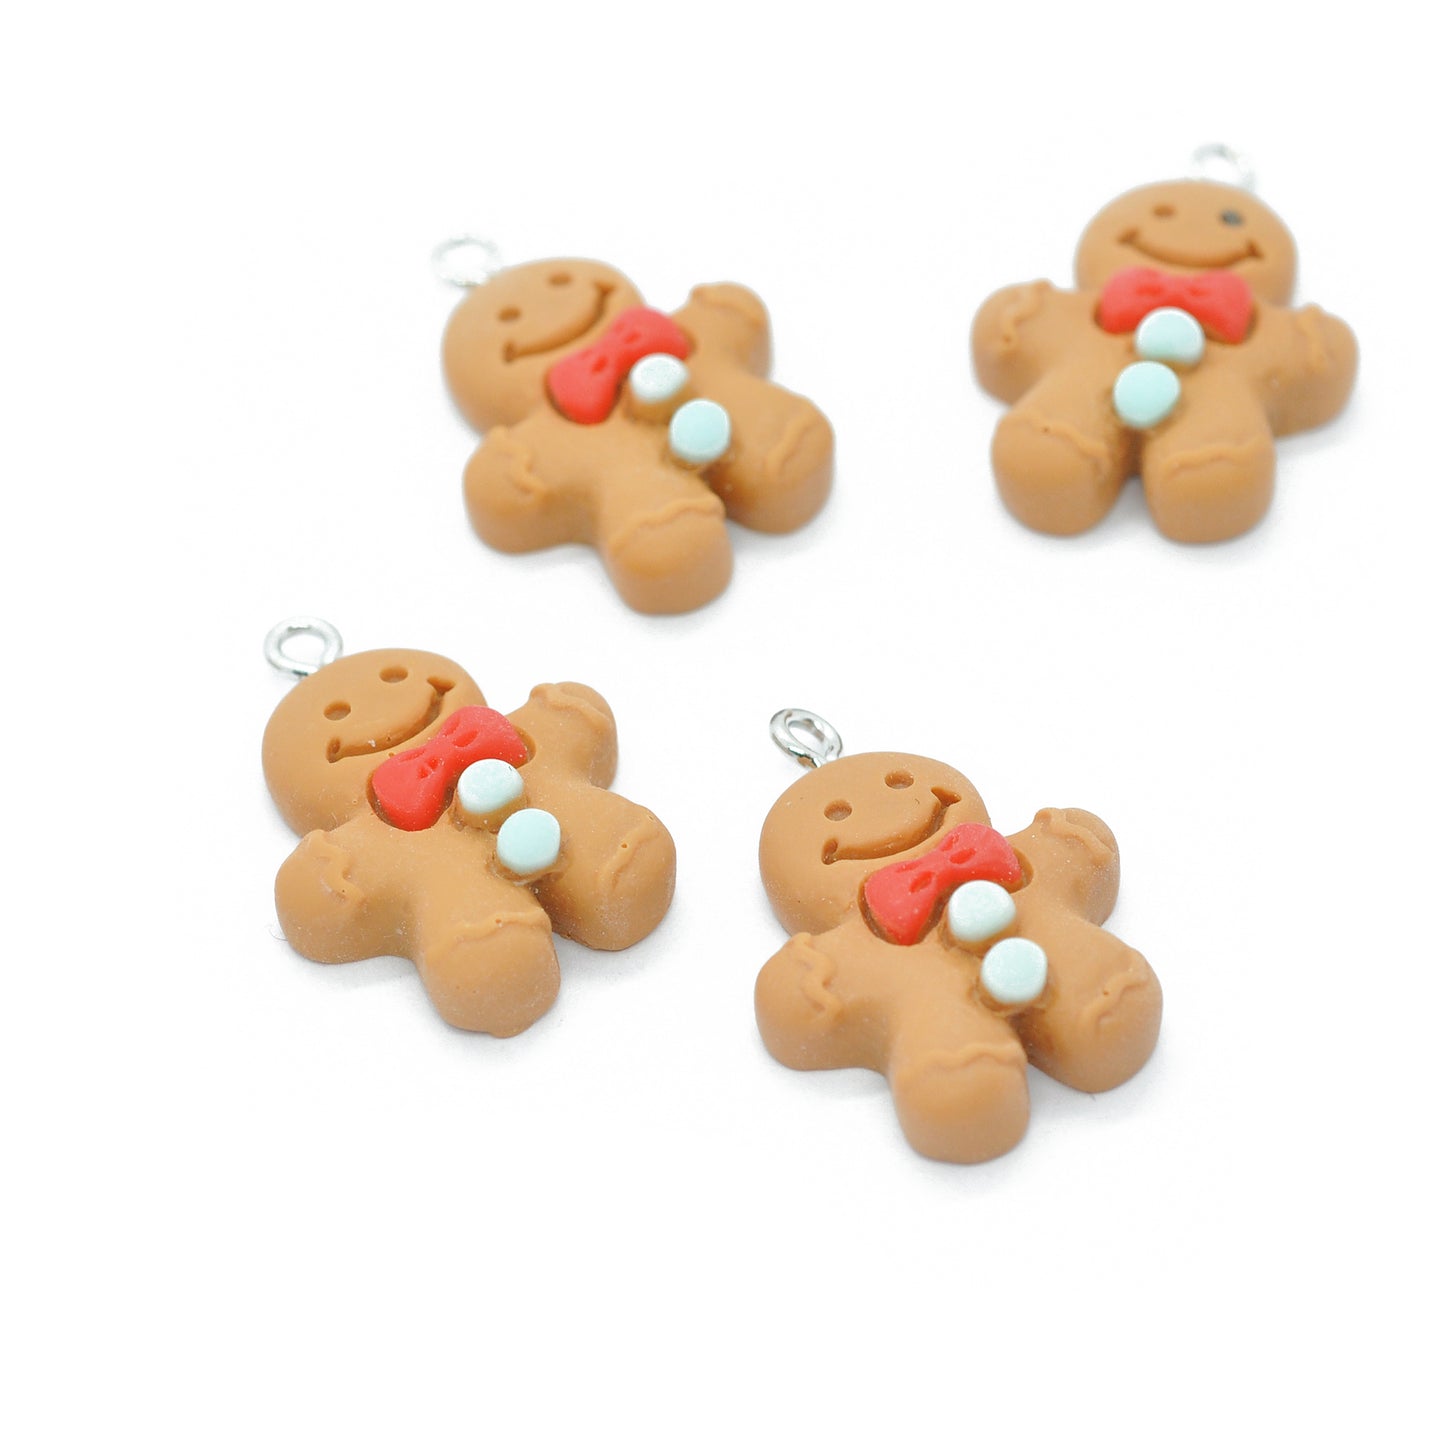 Polymer clay gingerbread man pendant / 27 mm